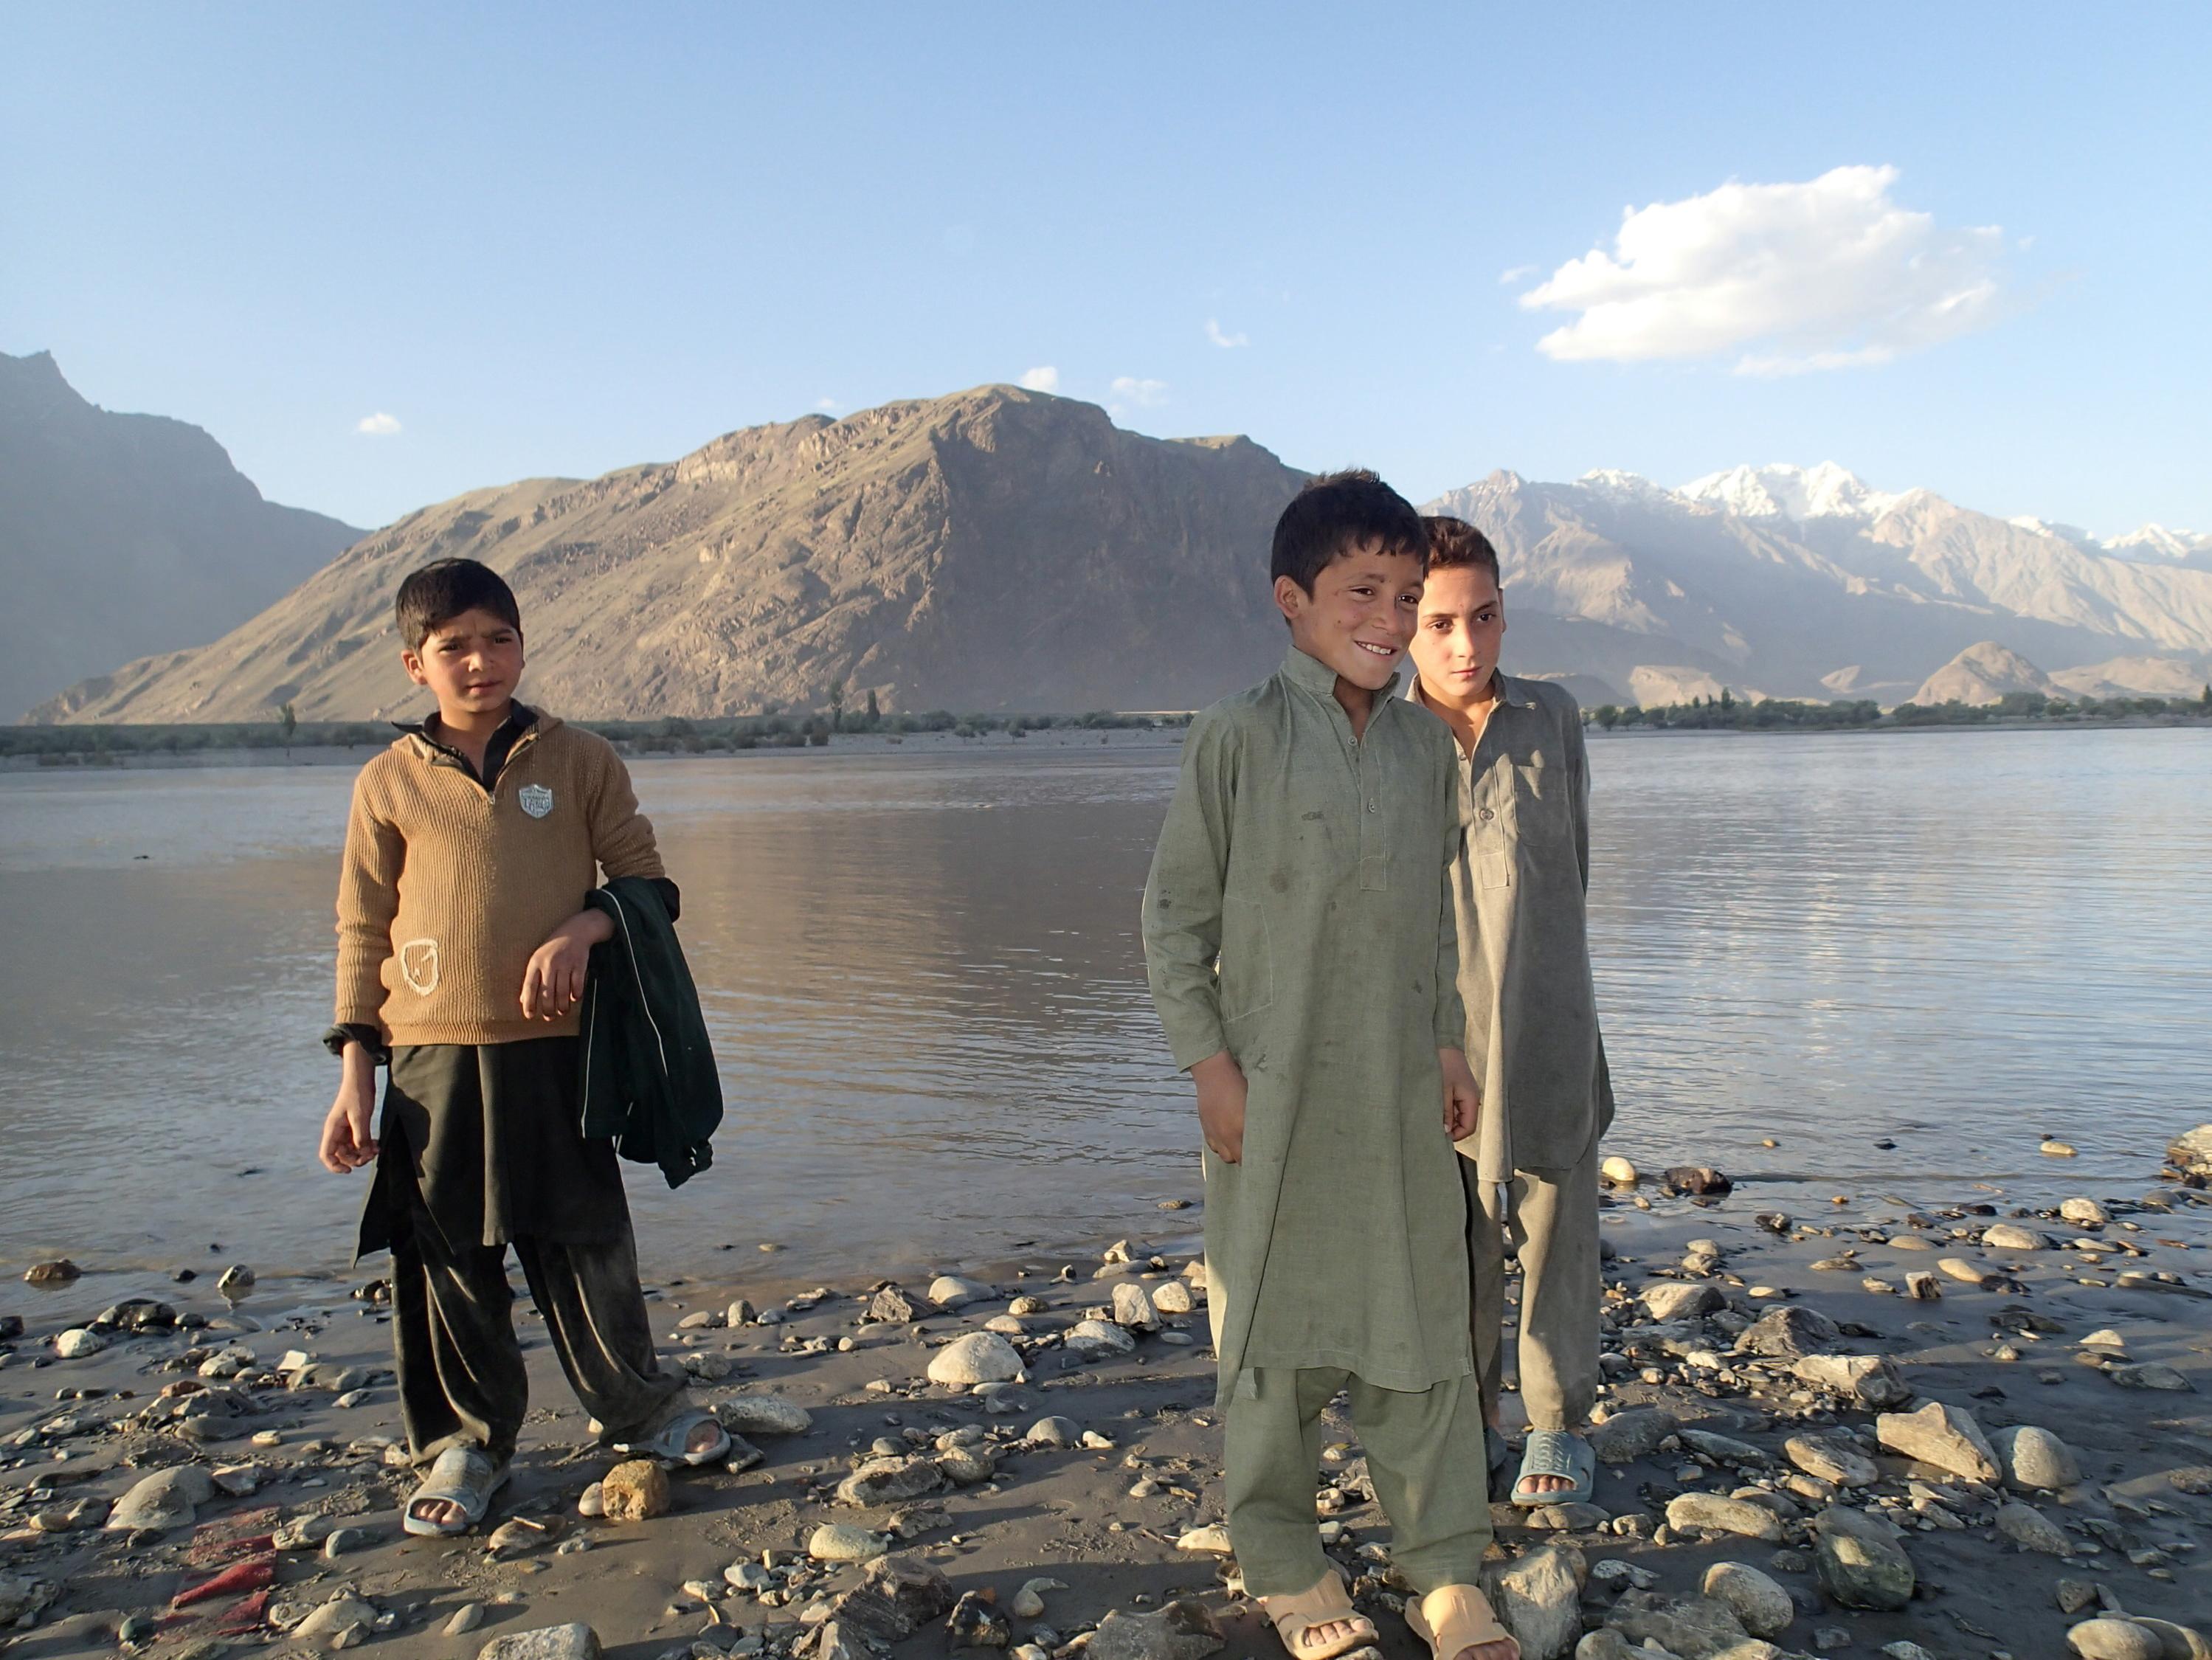 Indus river and boys